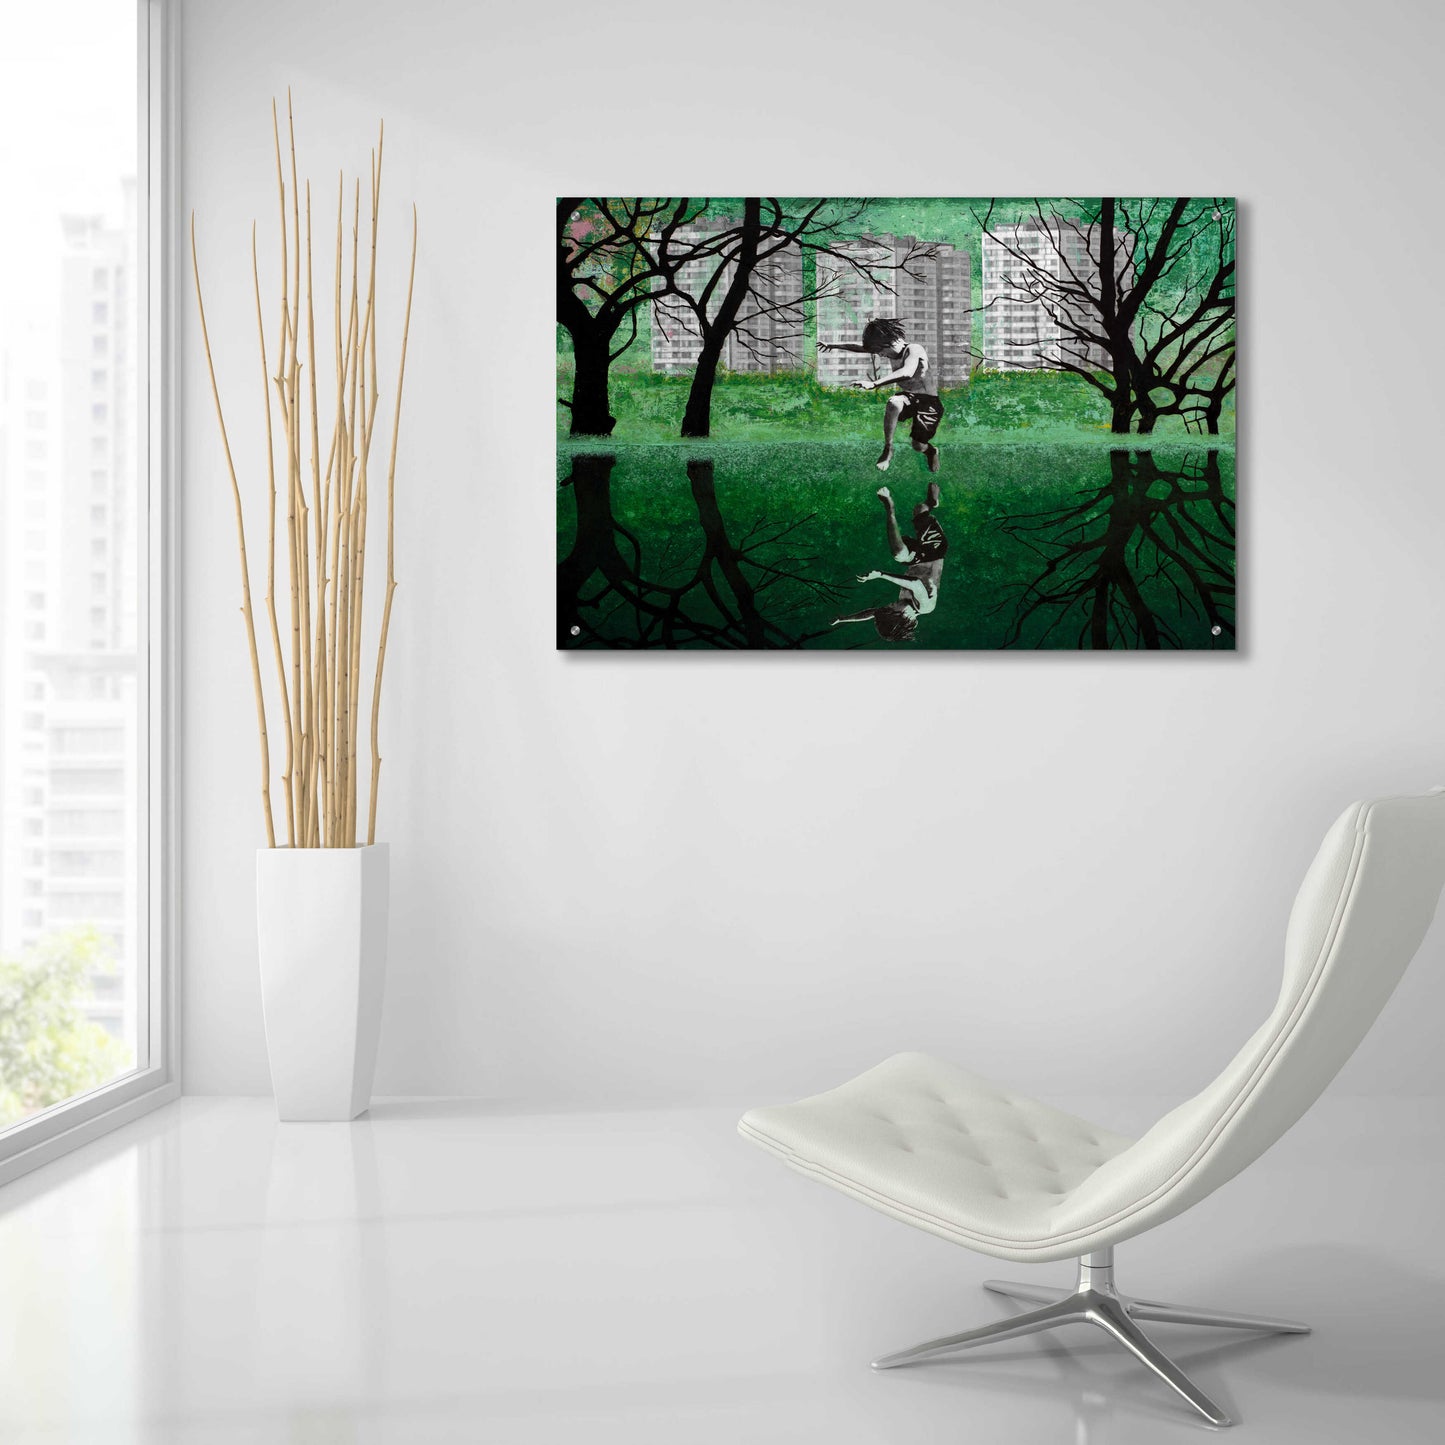 Epic Art 'THE GREEN POND' by DB Waterman,36x24